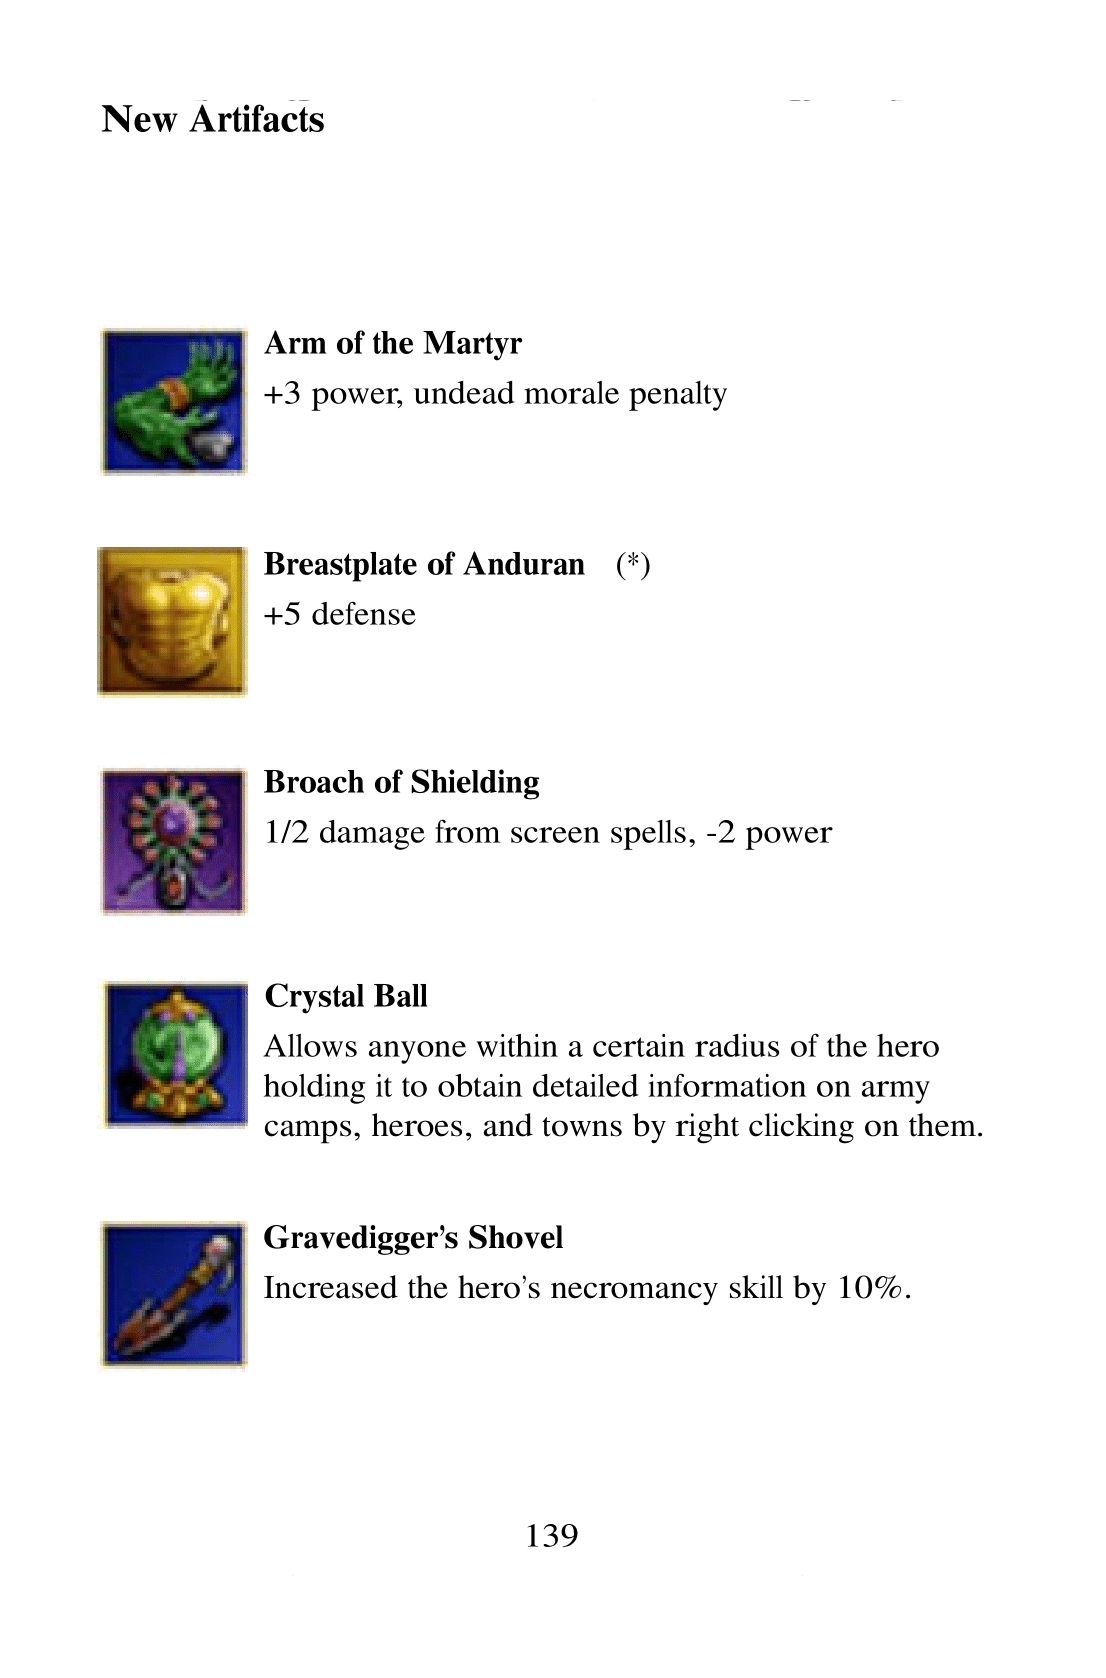 Heroes of Might and Magic II: Gold - game manual 139